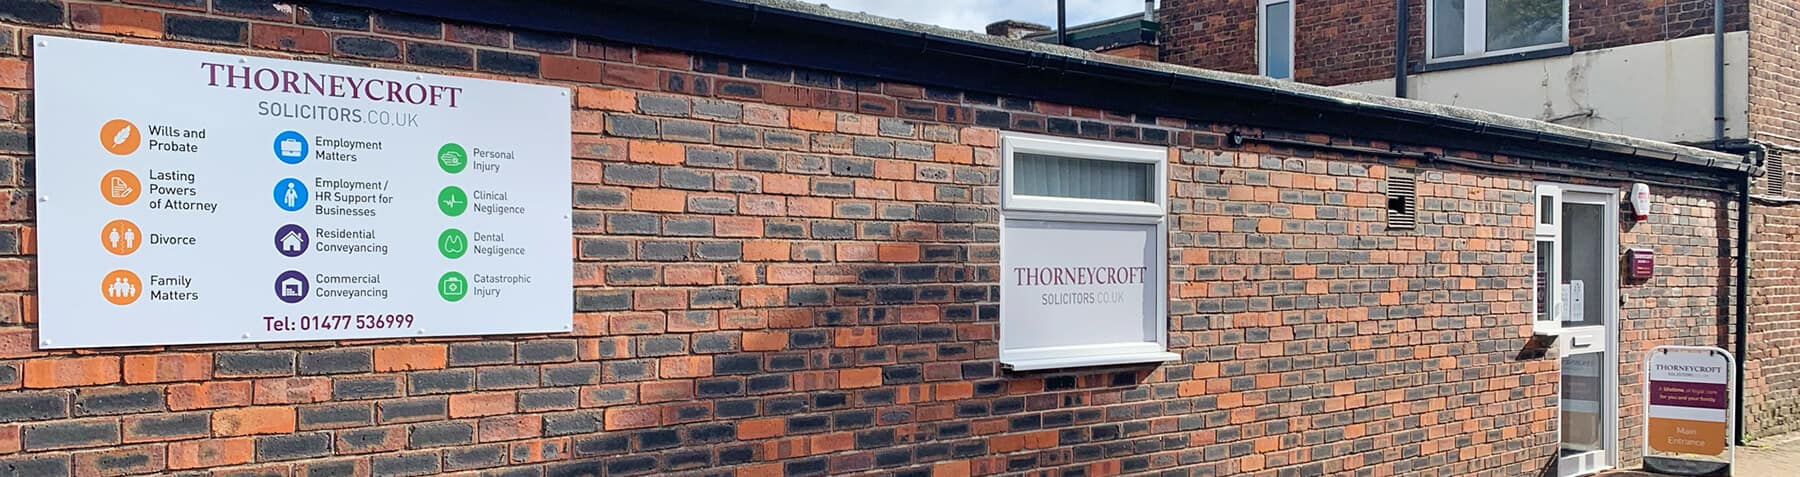 Holmes Chapel - Thorneycroft Solicitors